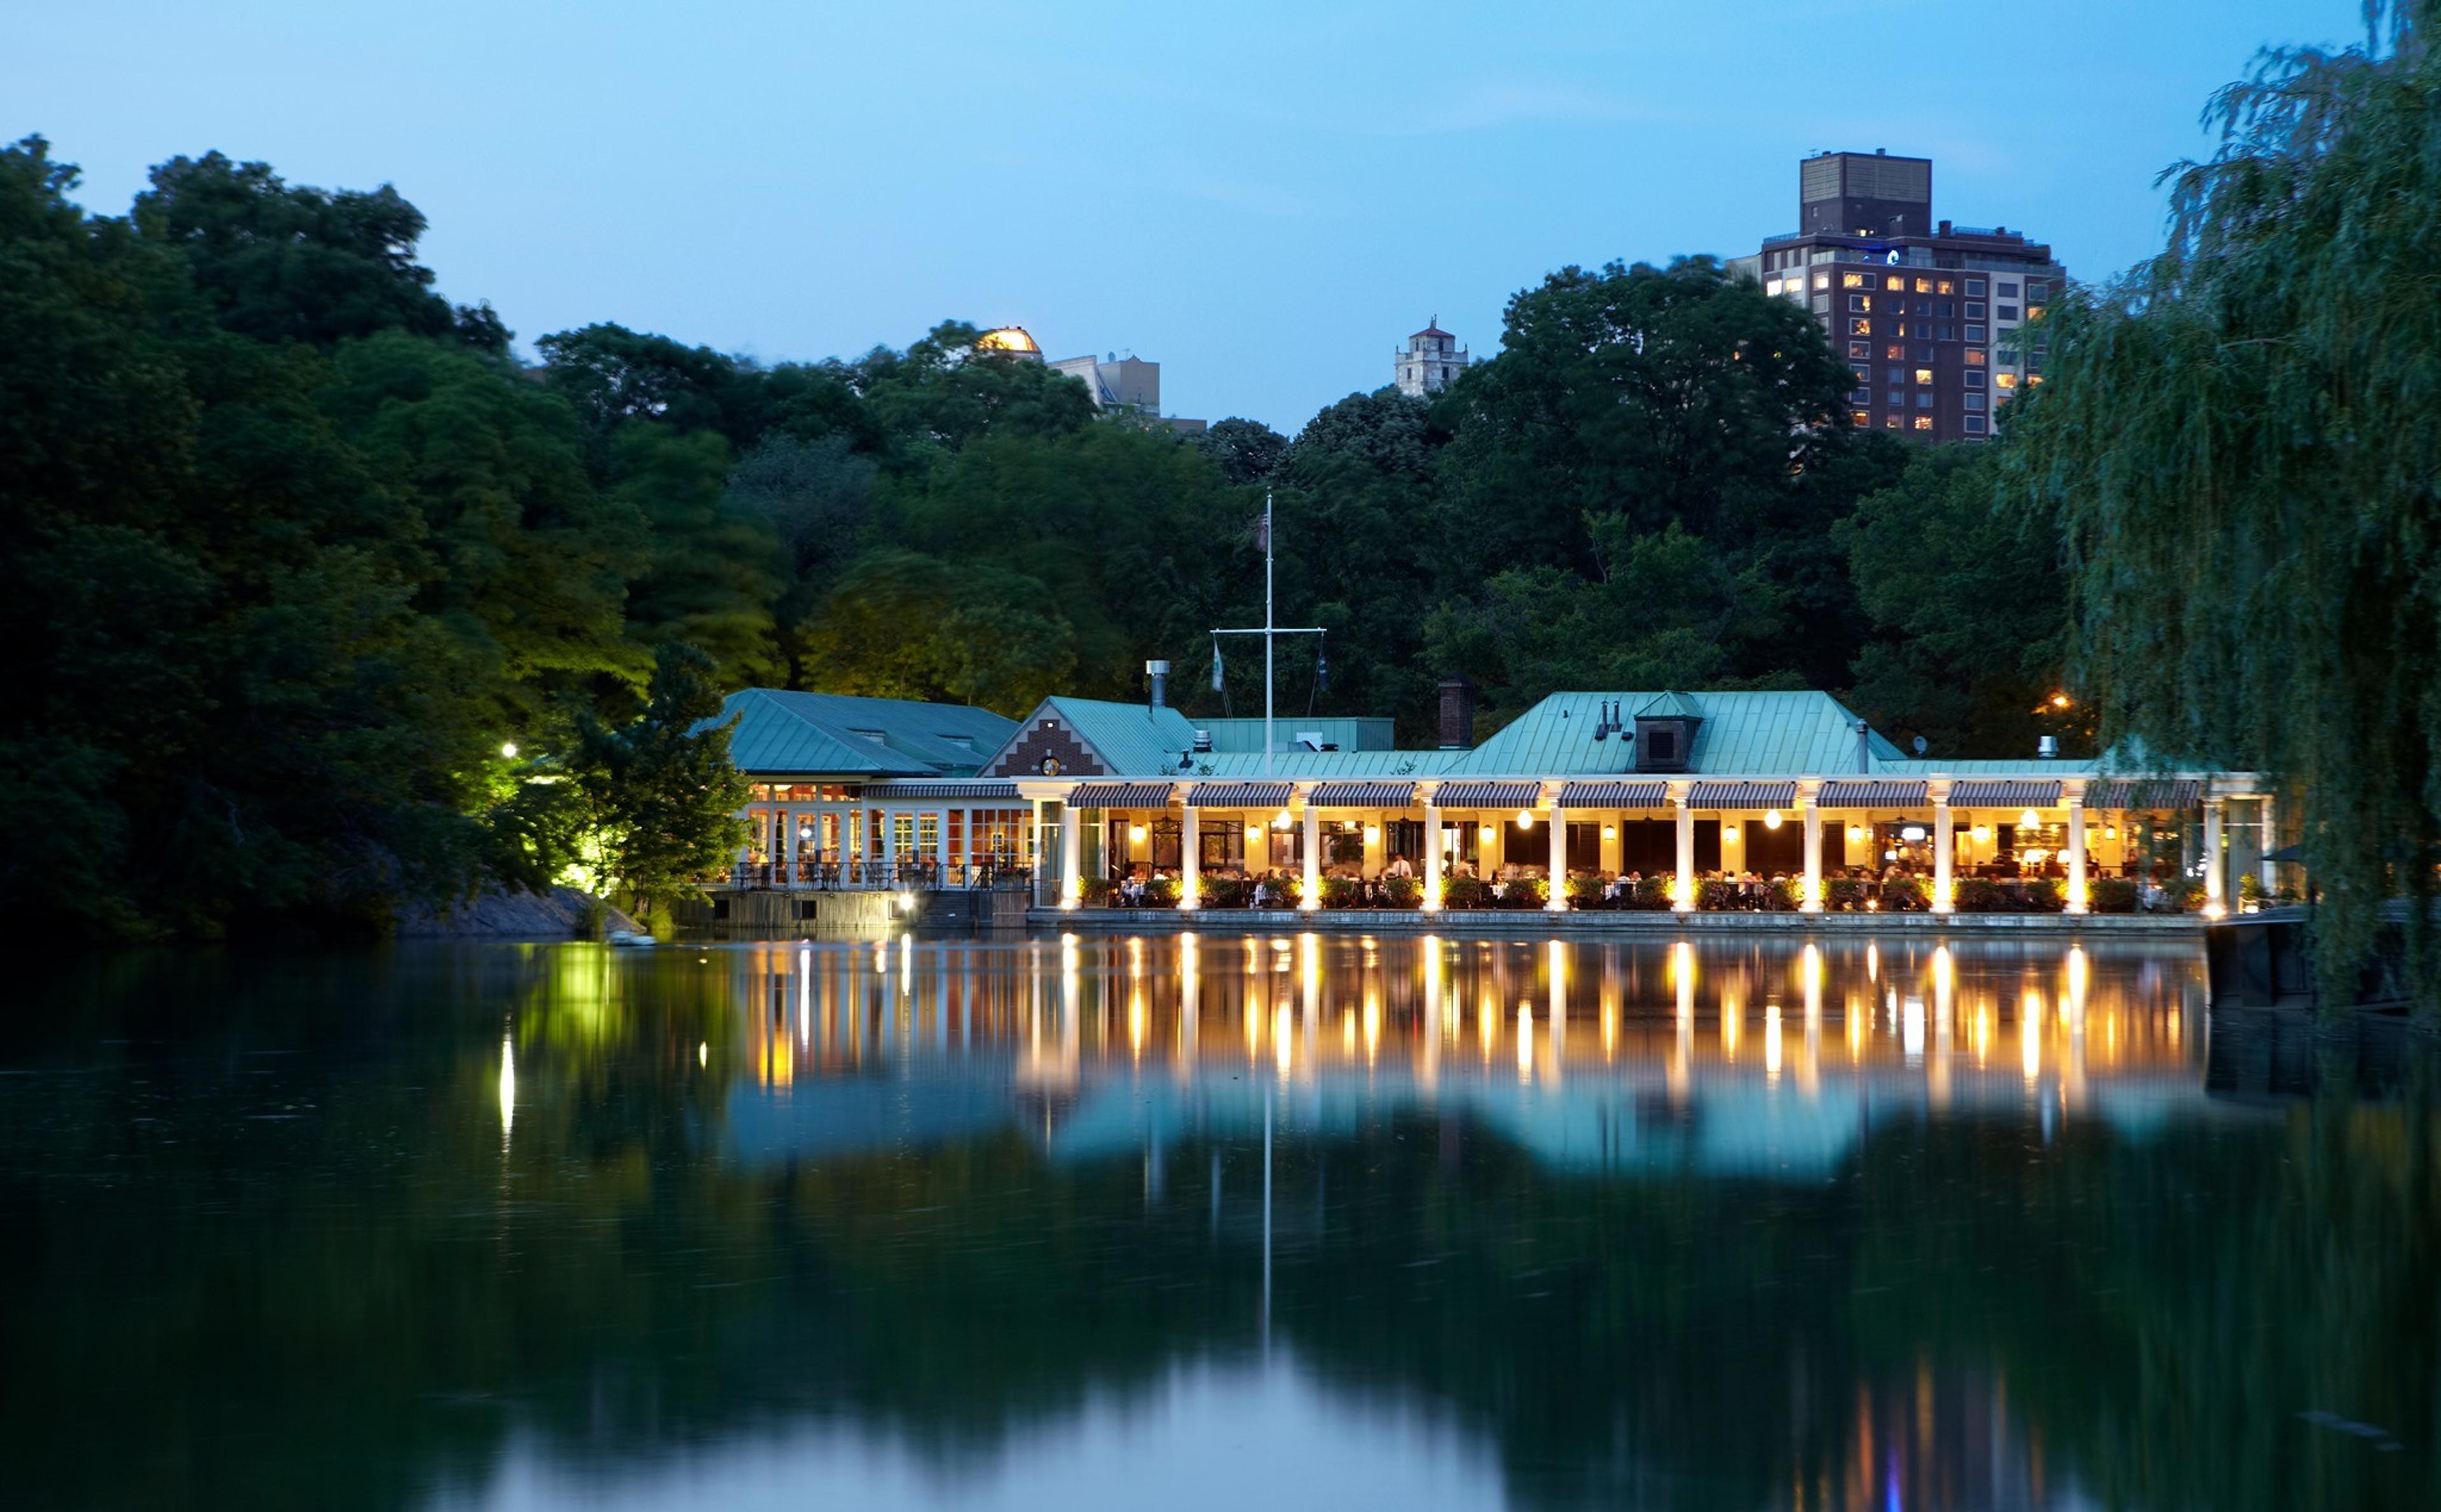 The Loeb Boathouse in Central Park